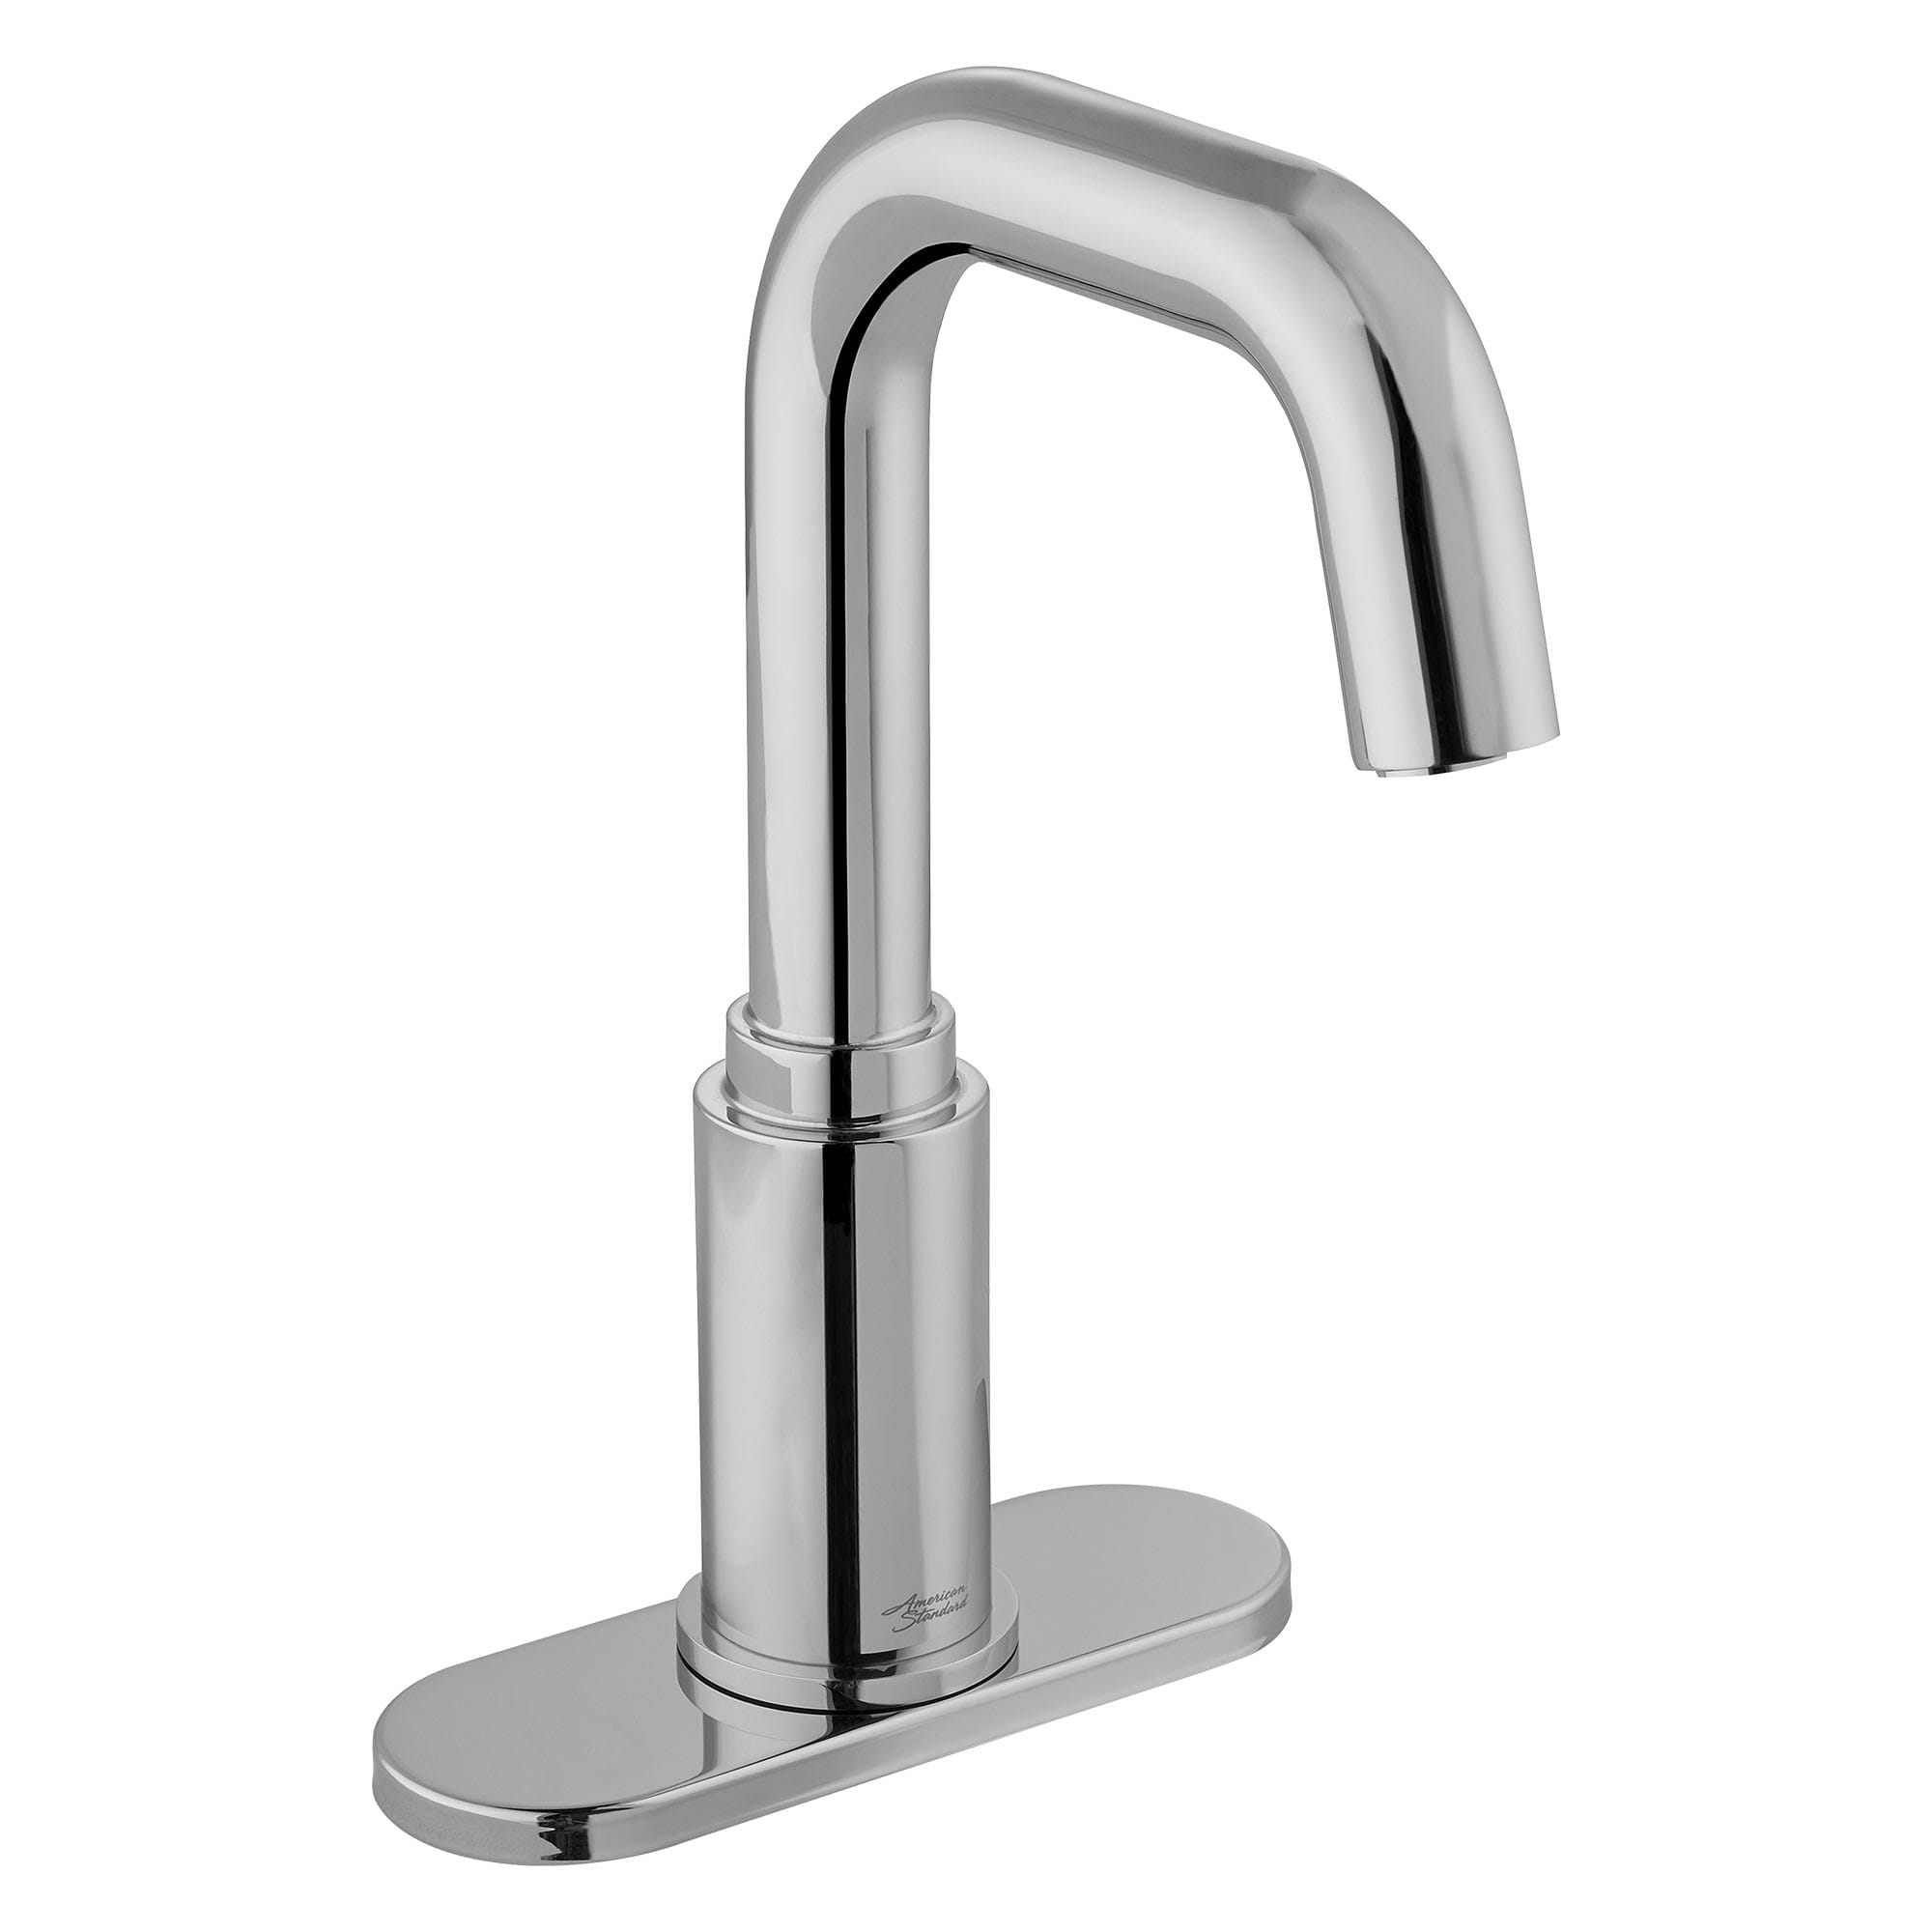 Serin® Touchless Faucet, Battery-Powered, 0.5 gpm/1.9 Lpm